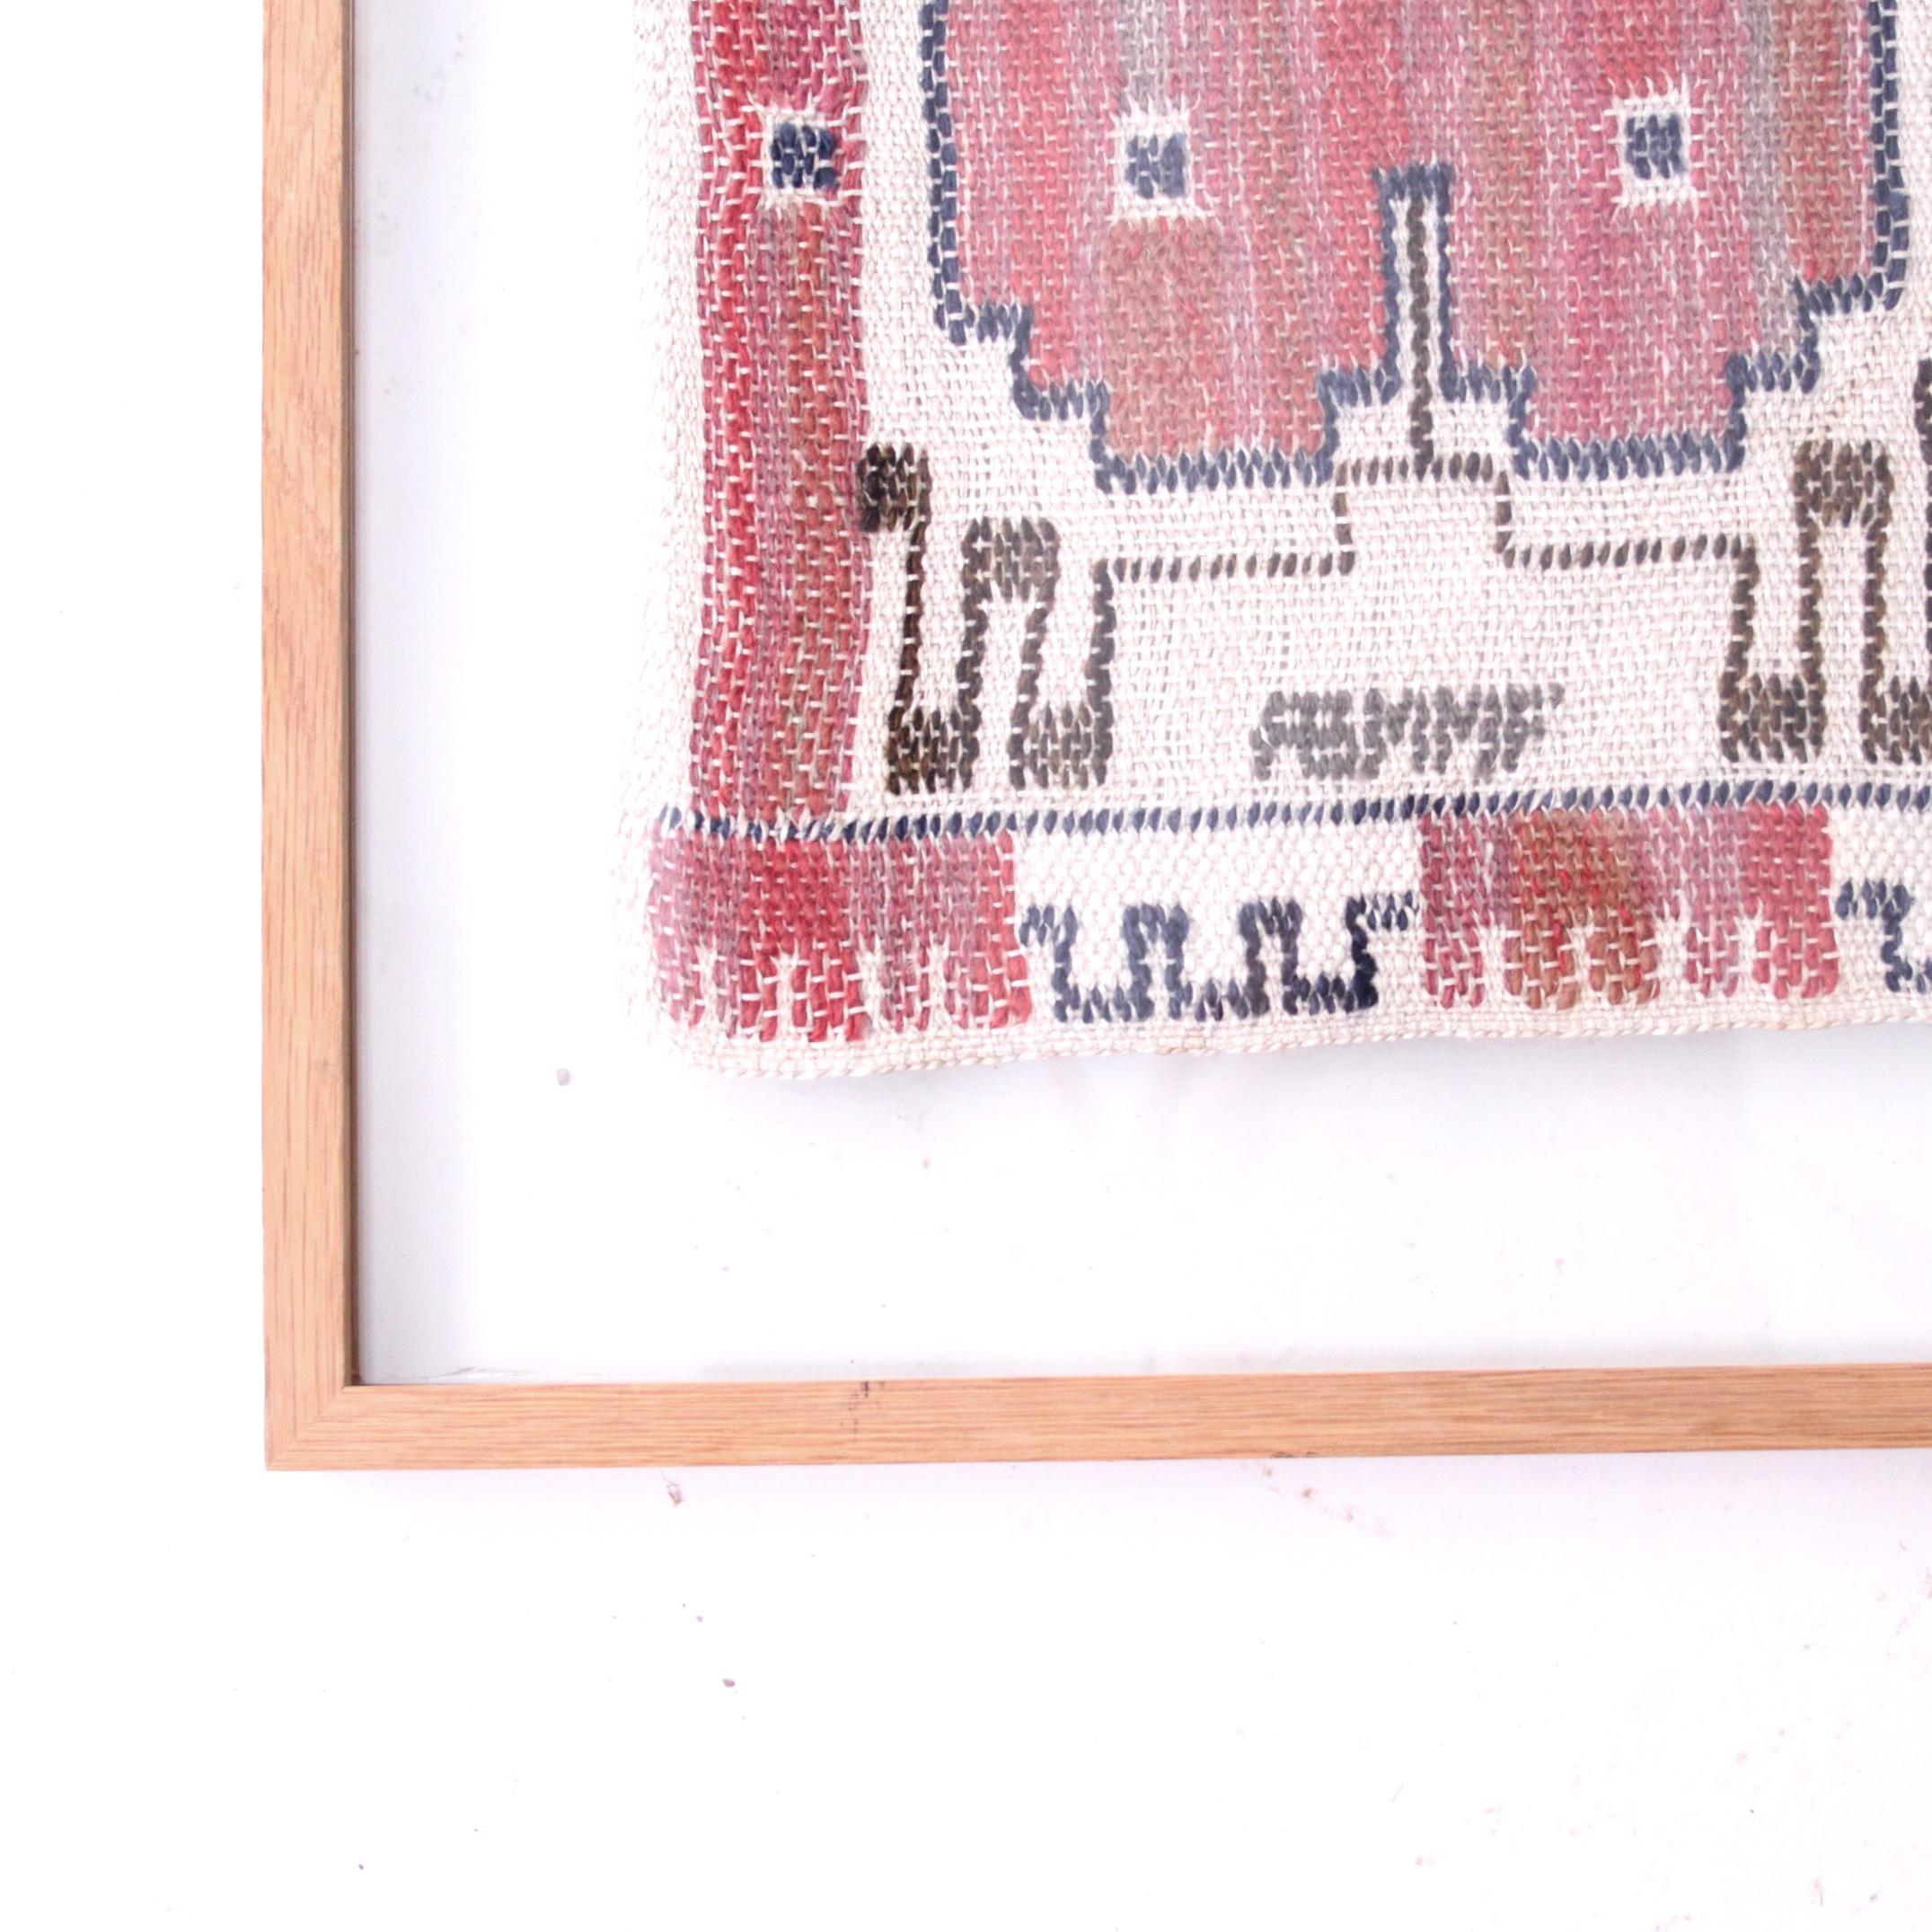 A beautiful handwoven textile in tapestry technique by Marta Maas-Fjetterström.

Framed in oak and double glass (sandwich) so that the wall color shows next to the tapestry.

Signed AB MMF. (AB Ma¨rta Ma°a°s-Fjetterstro¨m).

Designed in 1928,